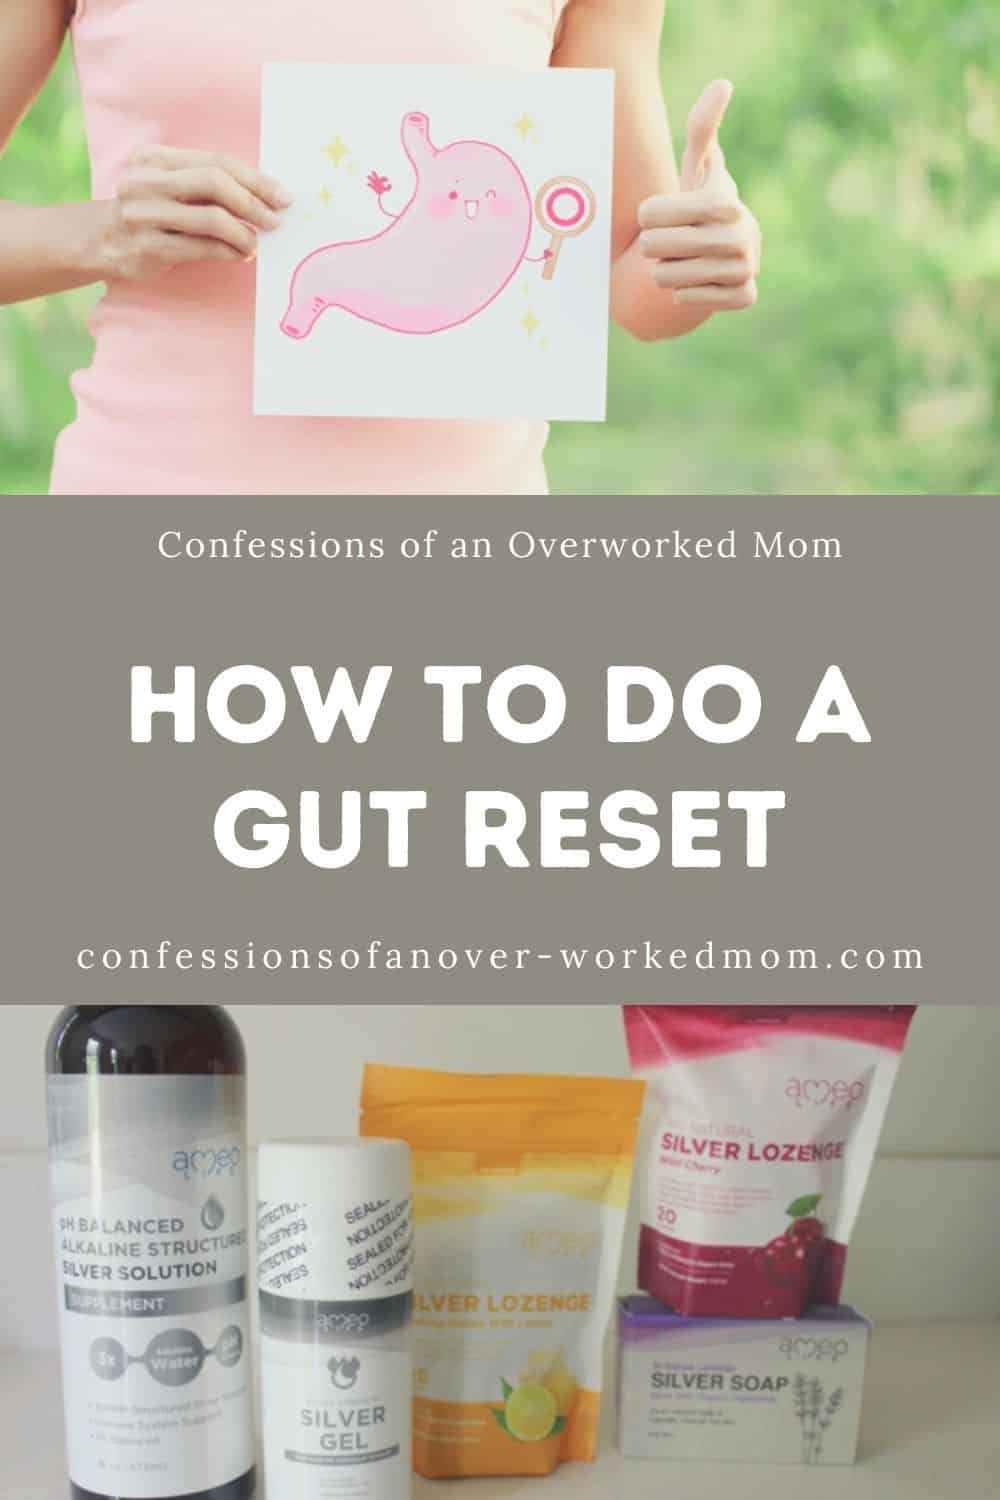 Have you considered a gut reset? For many of us, our gut is out of balance. We eat too much sugar and processed food, drink too much alcohol, and take antibiotics unnecessarily.